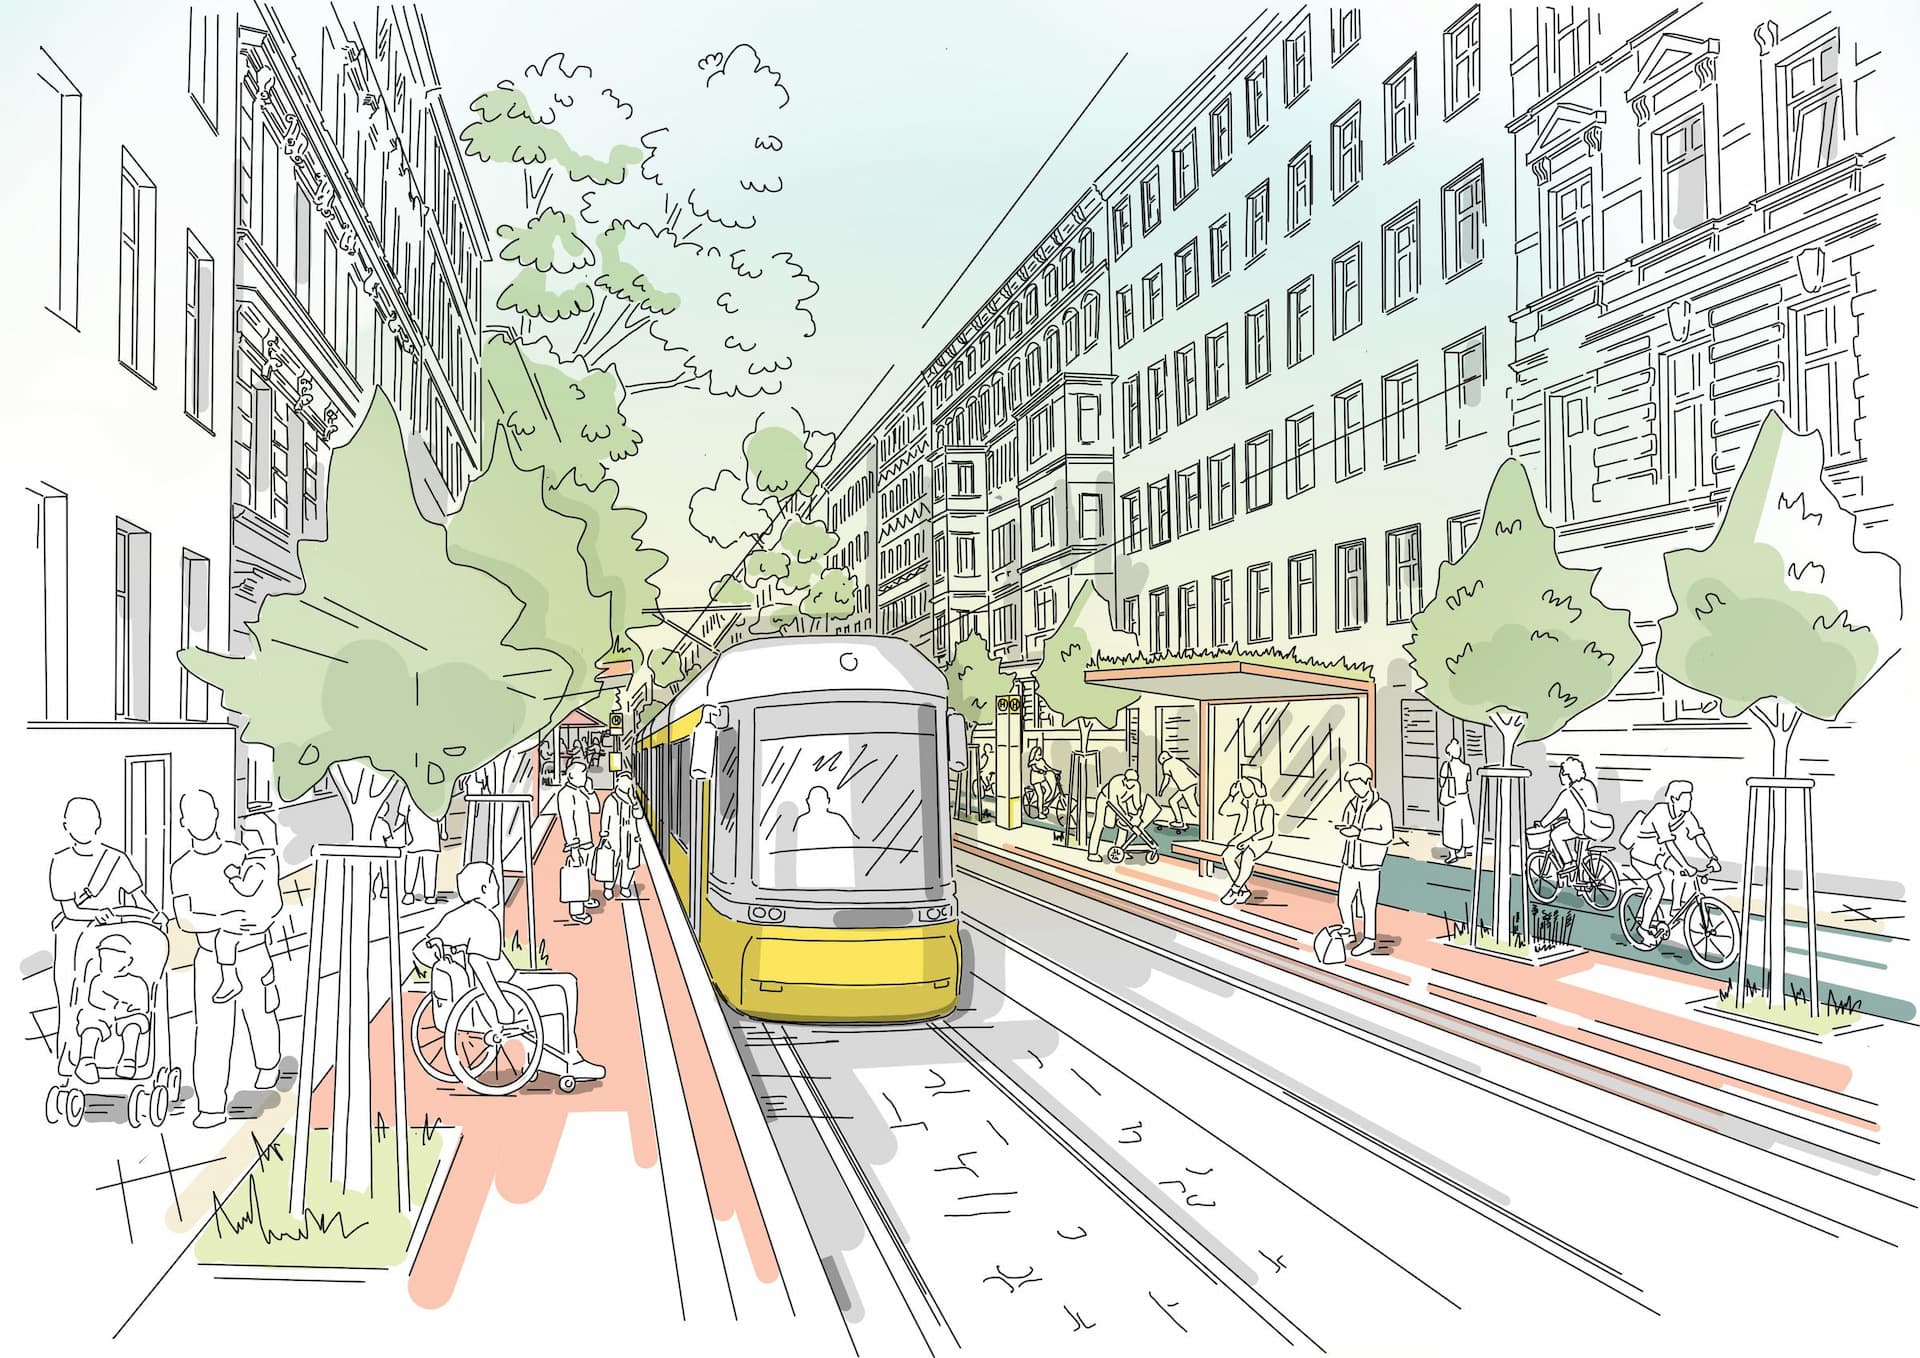 Drawing of the planned construction of the M!0 tram in Berlin 